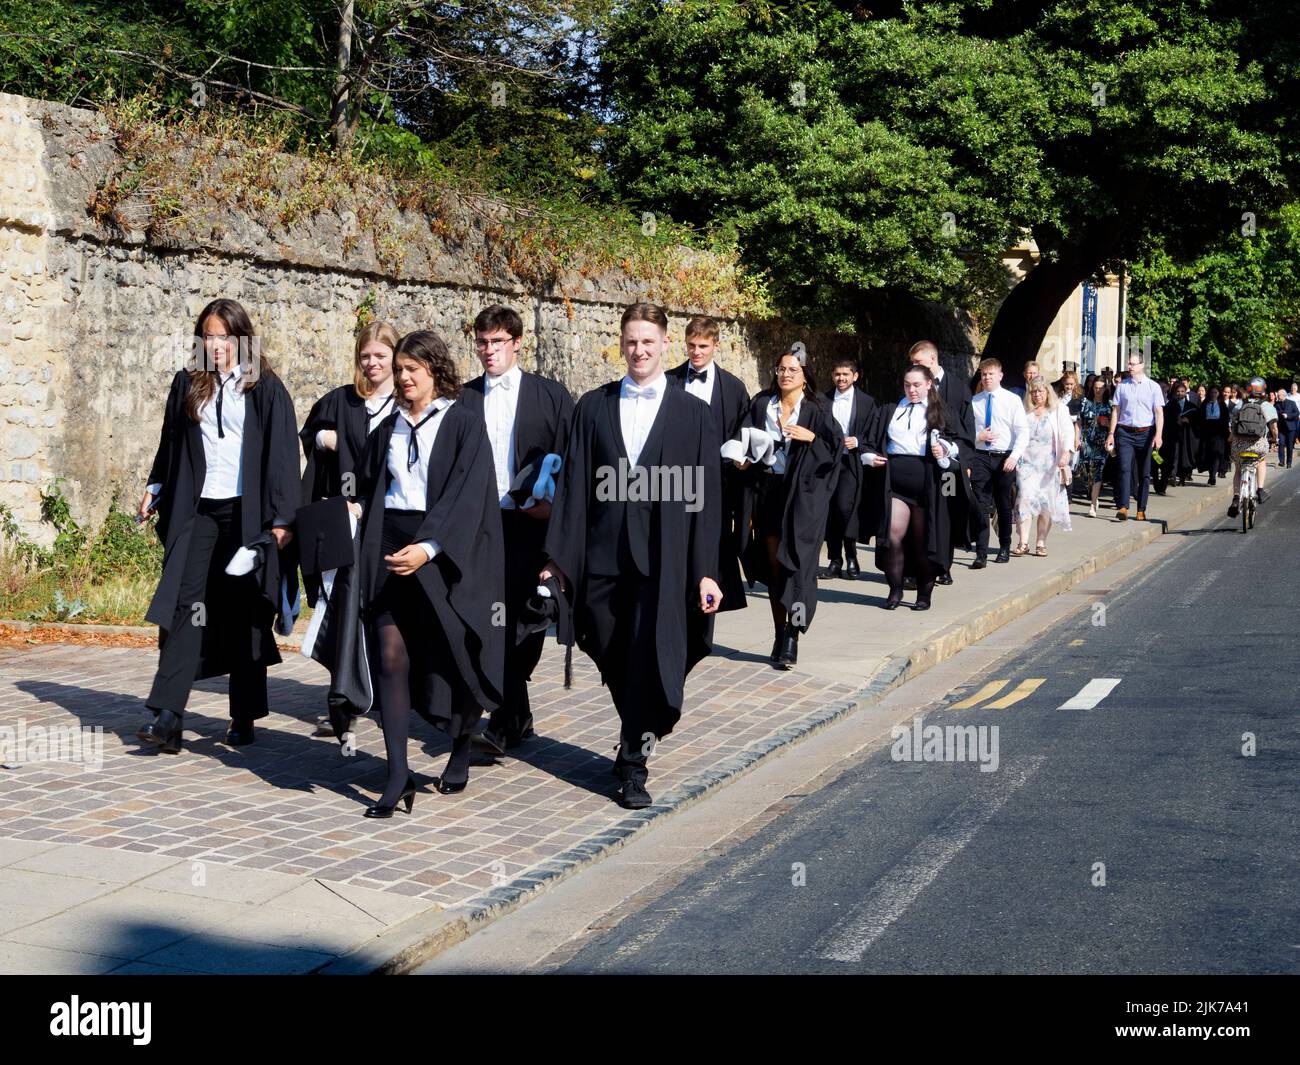 Every year there are a series matriculation ceremonies for students of Oxford University, complete with pomp, ritual and much joy. Here we see a line Stock Photo